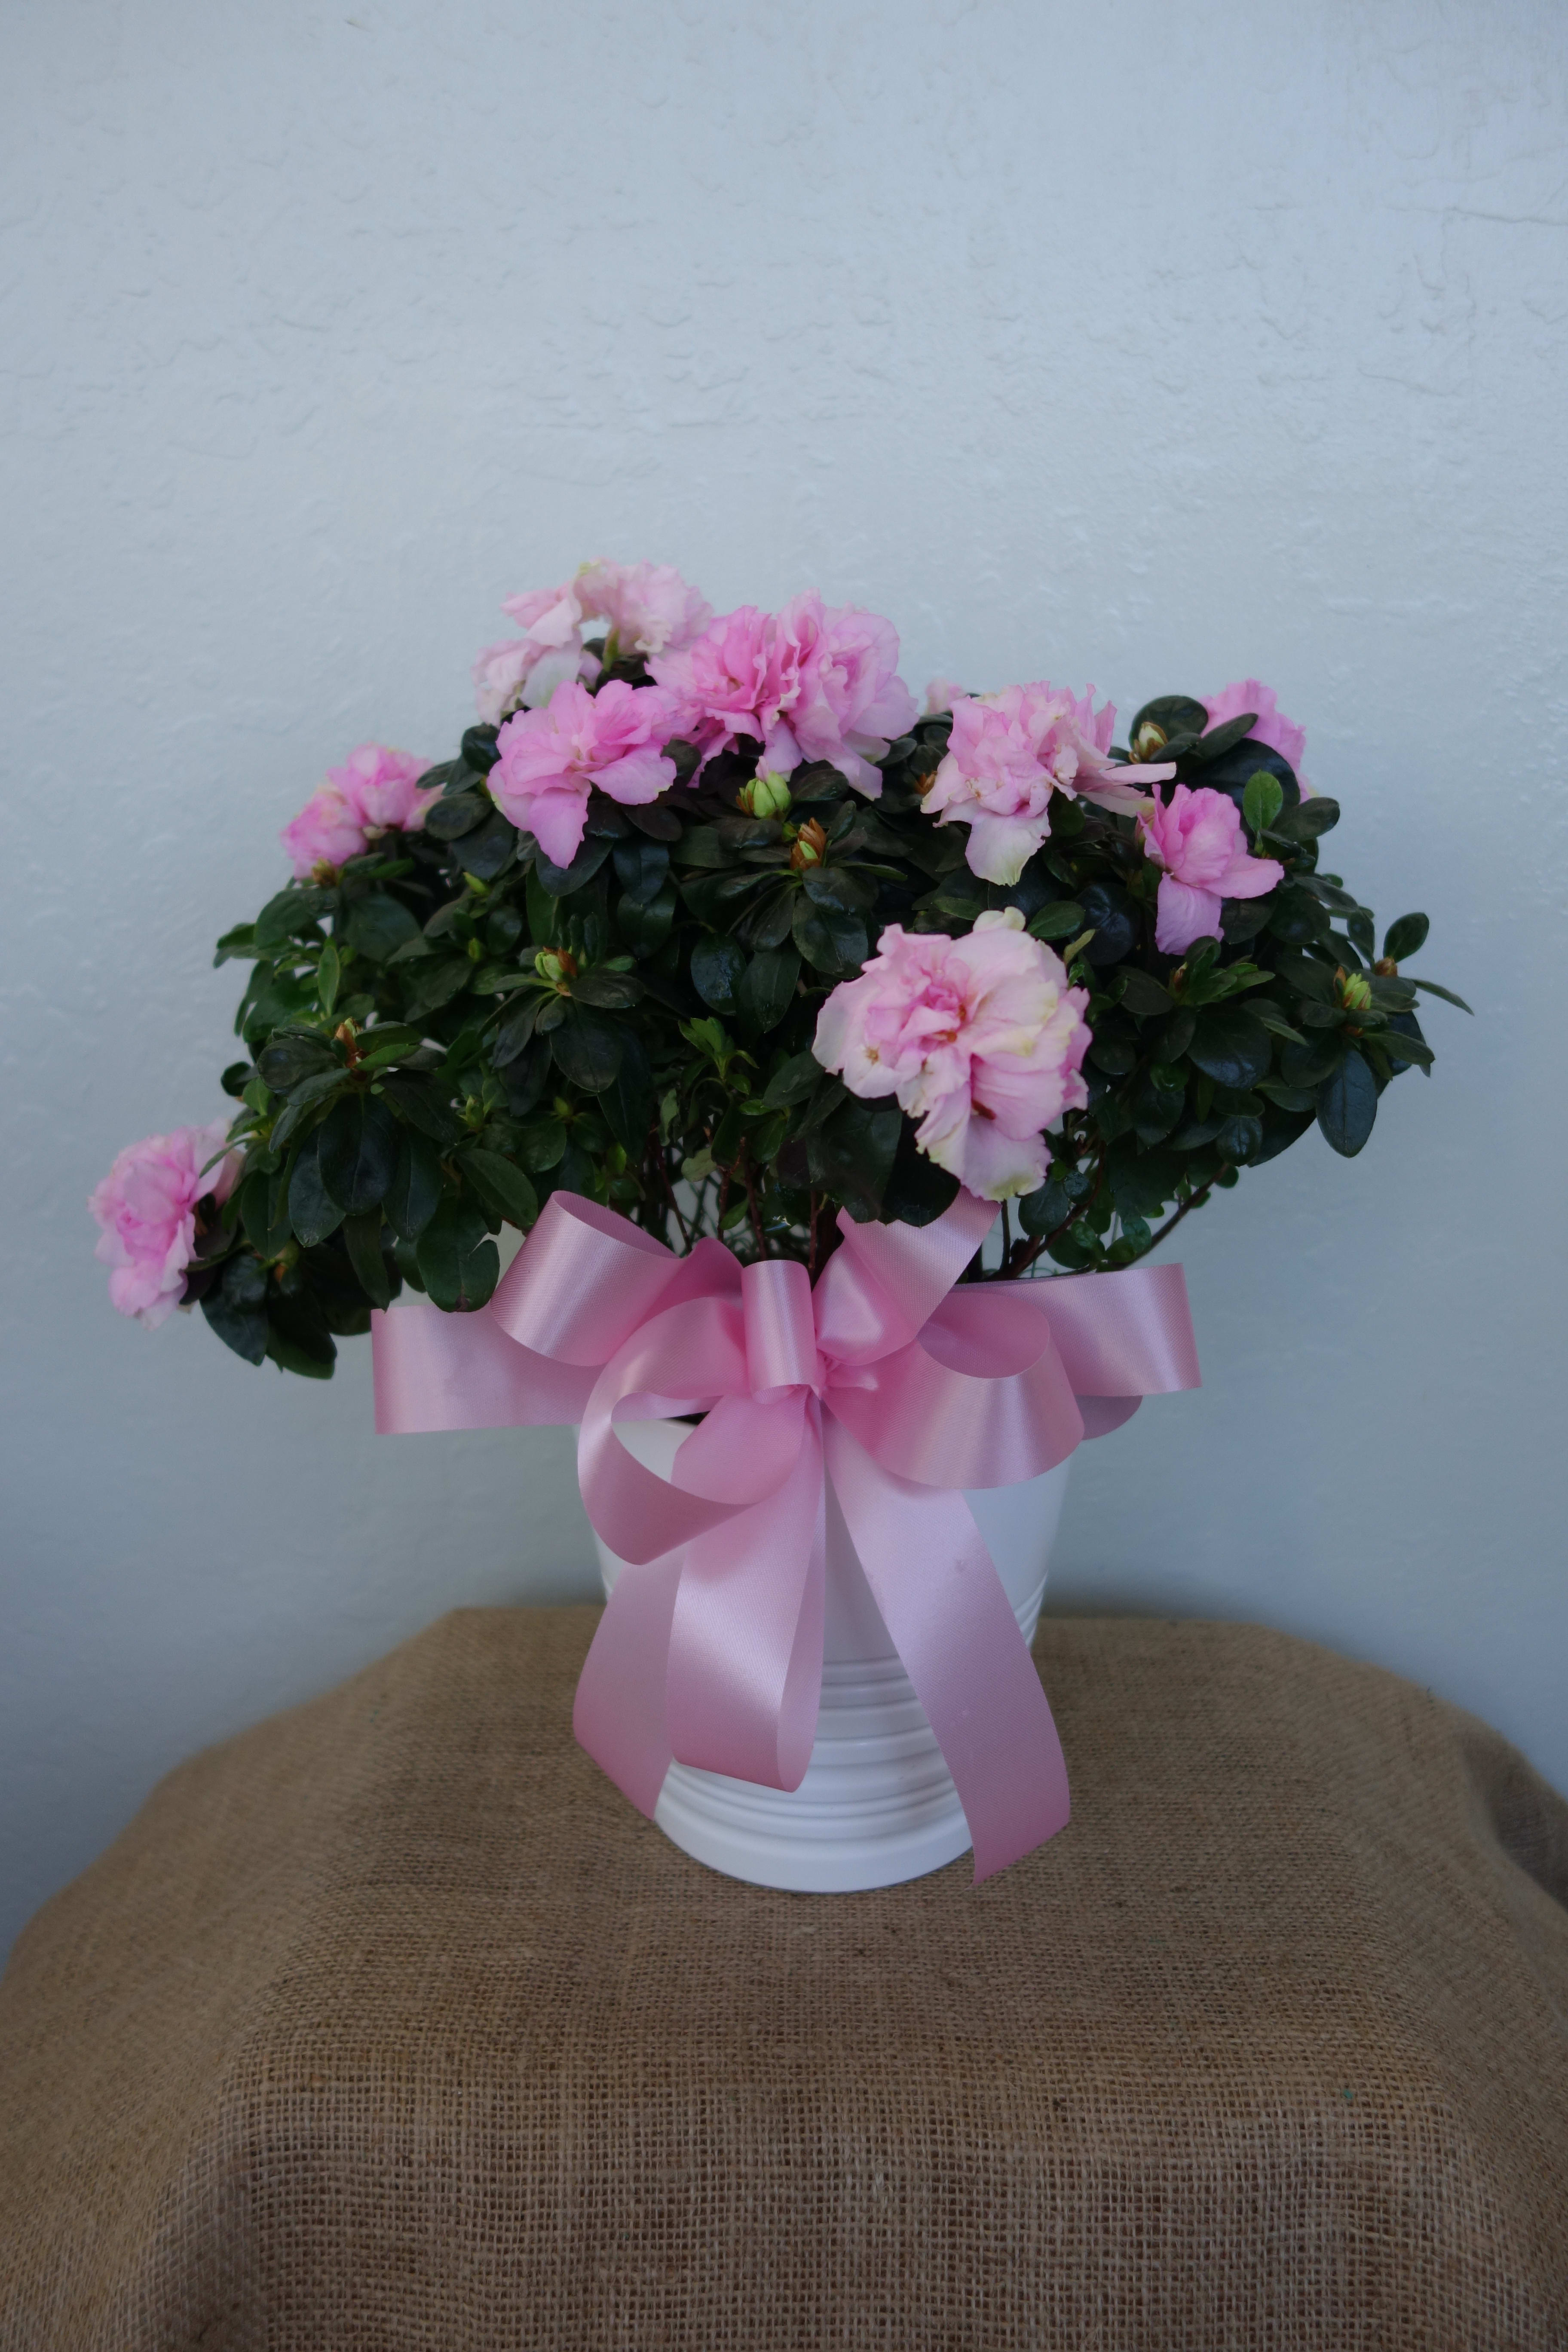 Pink Azalea Plant - 6'' potted azalea plant in a white pot. Azalea colors are available in white, pink, and hot pink. Please note in the special instructions which color you prefer for the plant + ribbon and we will do our best to accommodate. Colors may vary depending on store availability. If there is no color preference, we will select the highest quality azalea available.